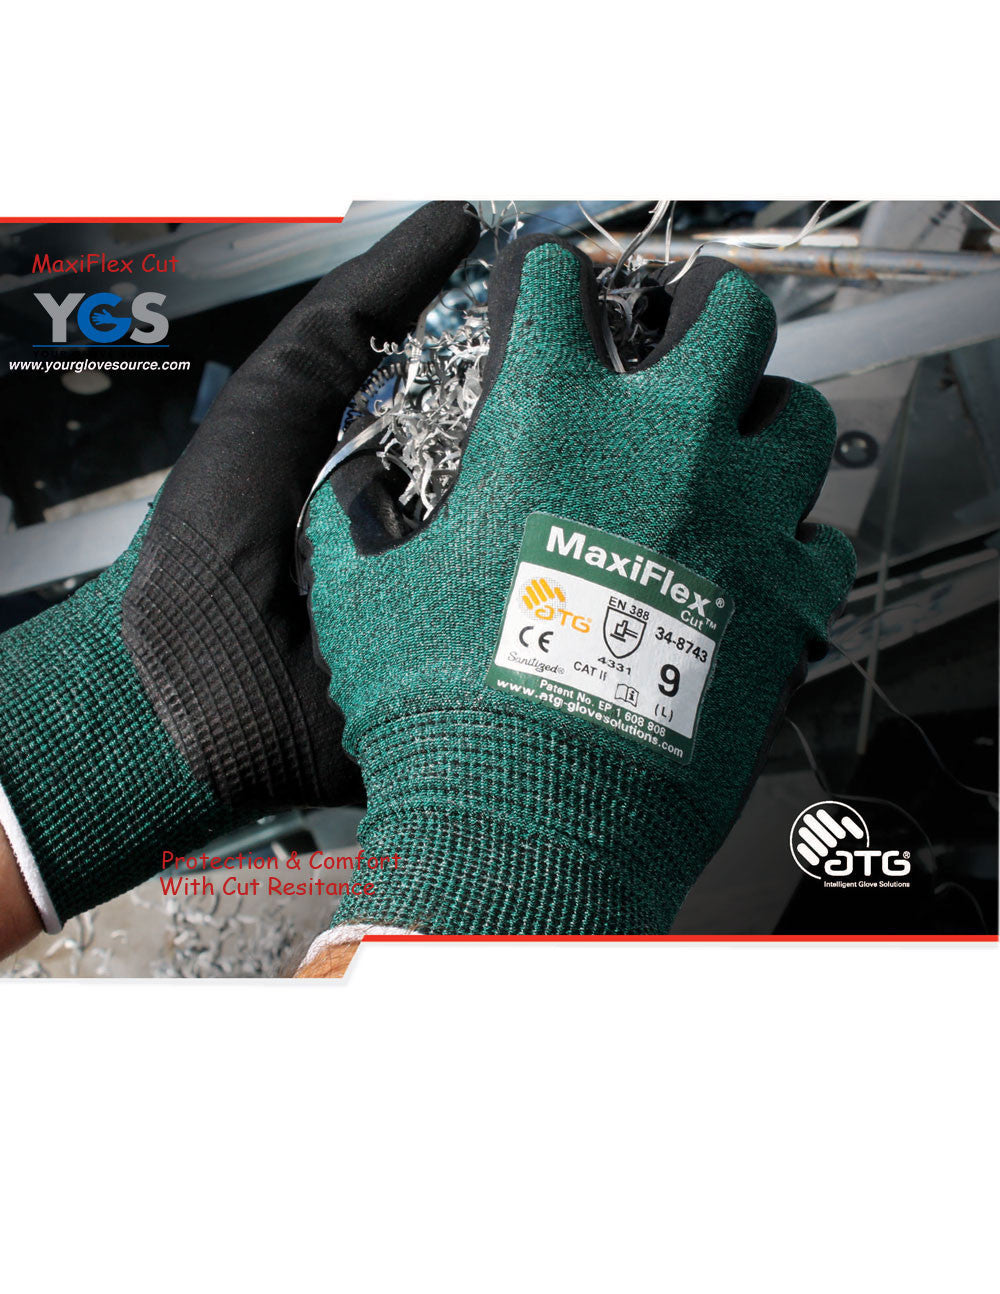 Dropship 4 Pairs Safety Anti Cut Gloves High-strength Industry